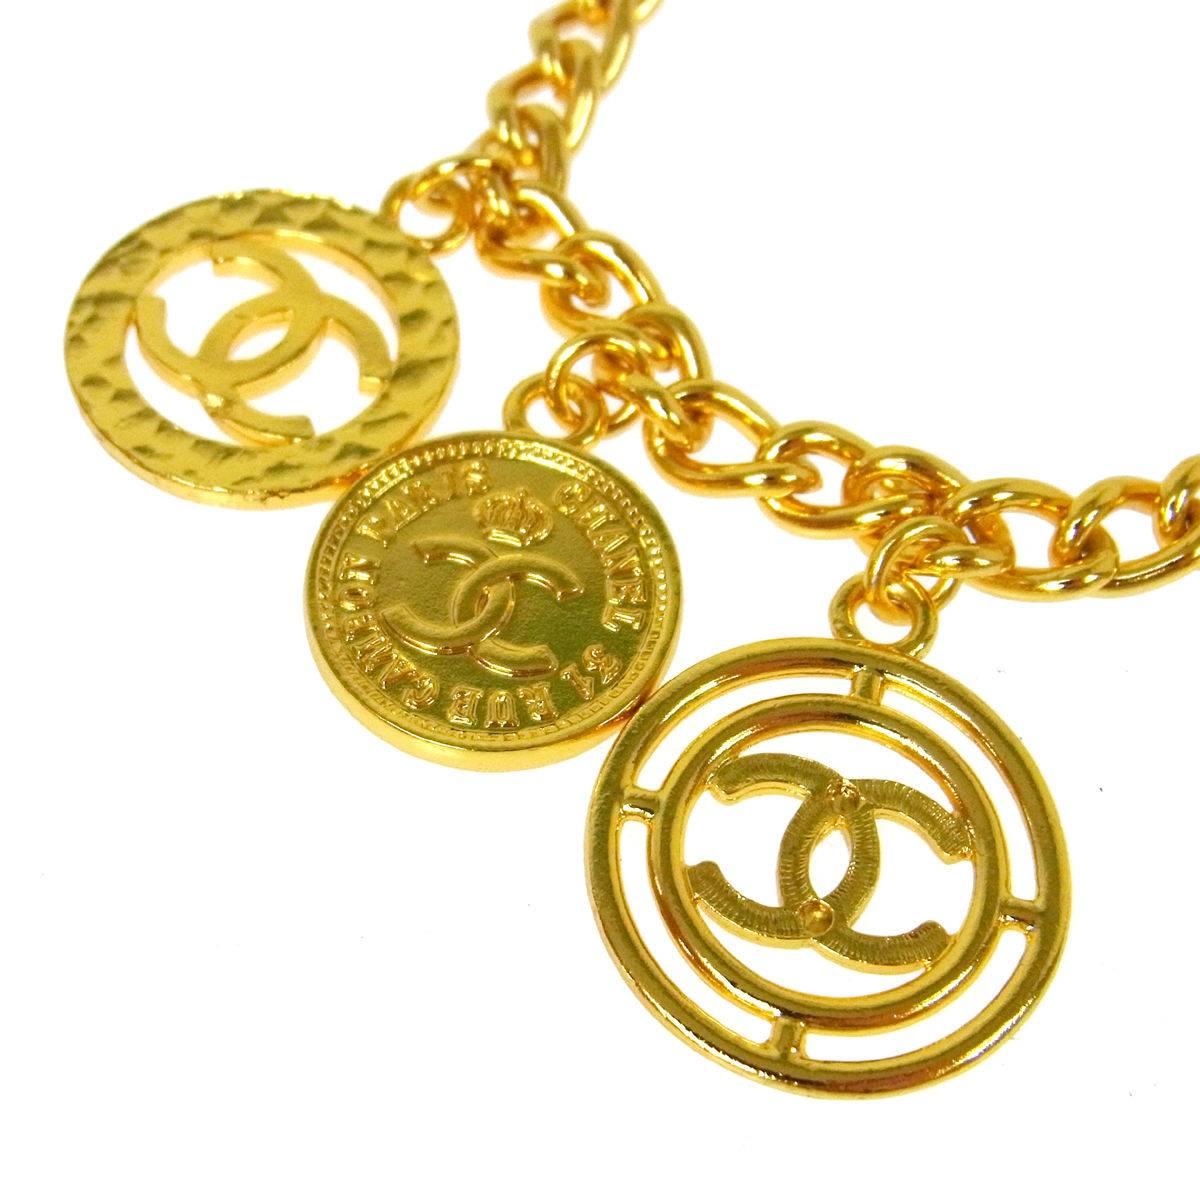 CURATOR'S NOTES

Metal
Gold tone
Toggle closure
Made in France
Charm diameter ~1"
Inner circumference ~7.9"

Shop Newfound Luxury for authentic vintage Chanel charm bracelets and jewelry.
